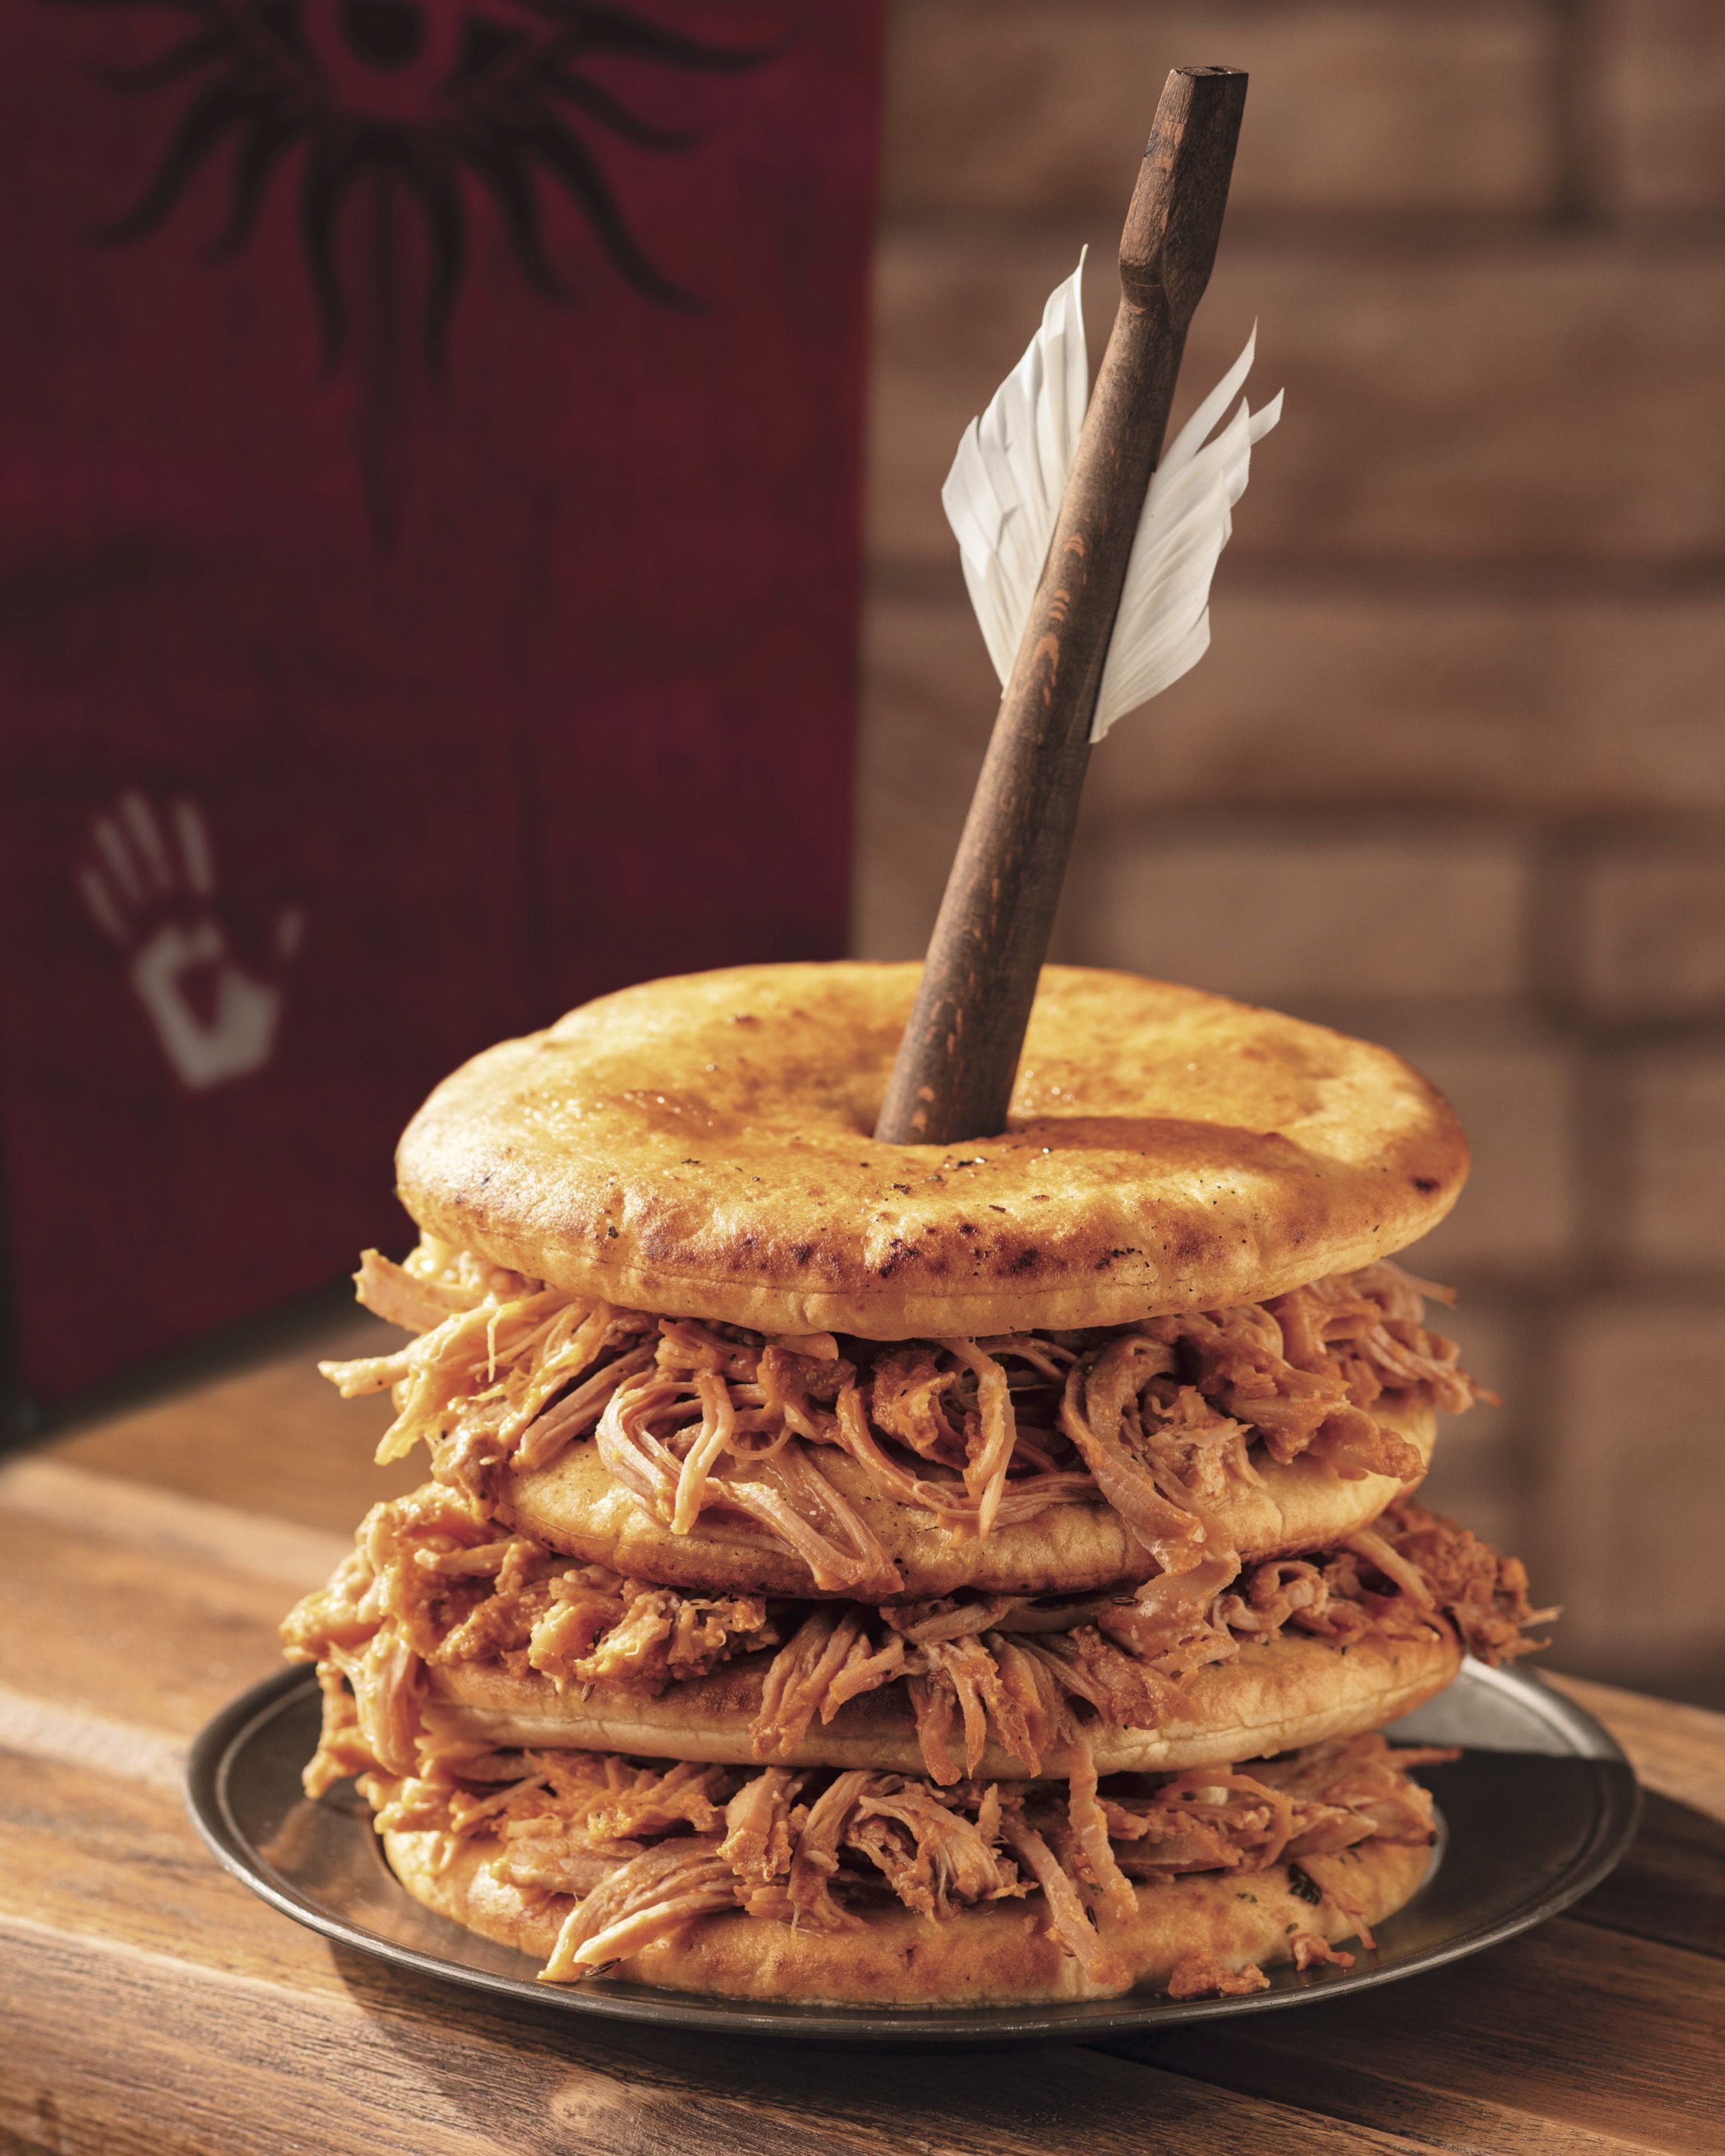 A stack of savory pancakes with pulled pork between each layer, and a crossbow bolt protruding from the stack.